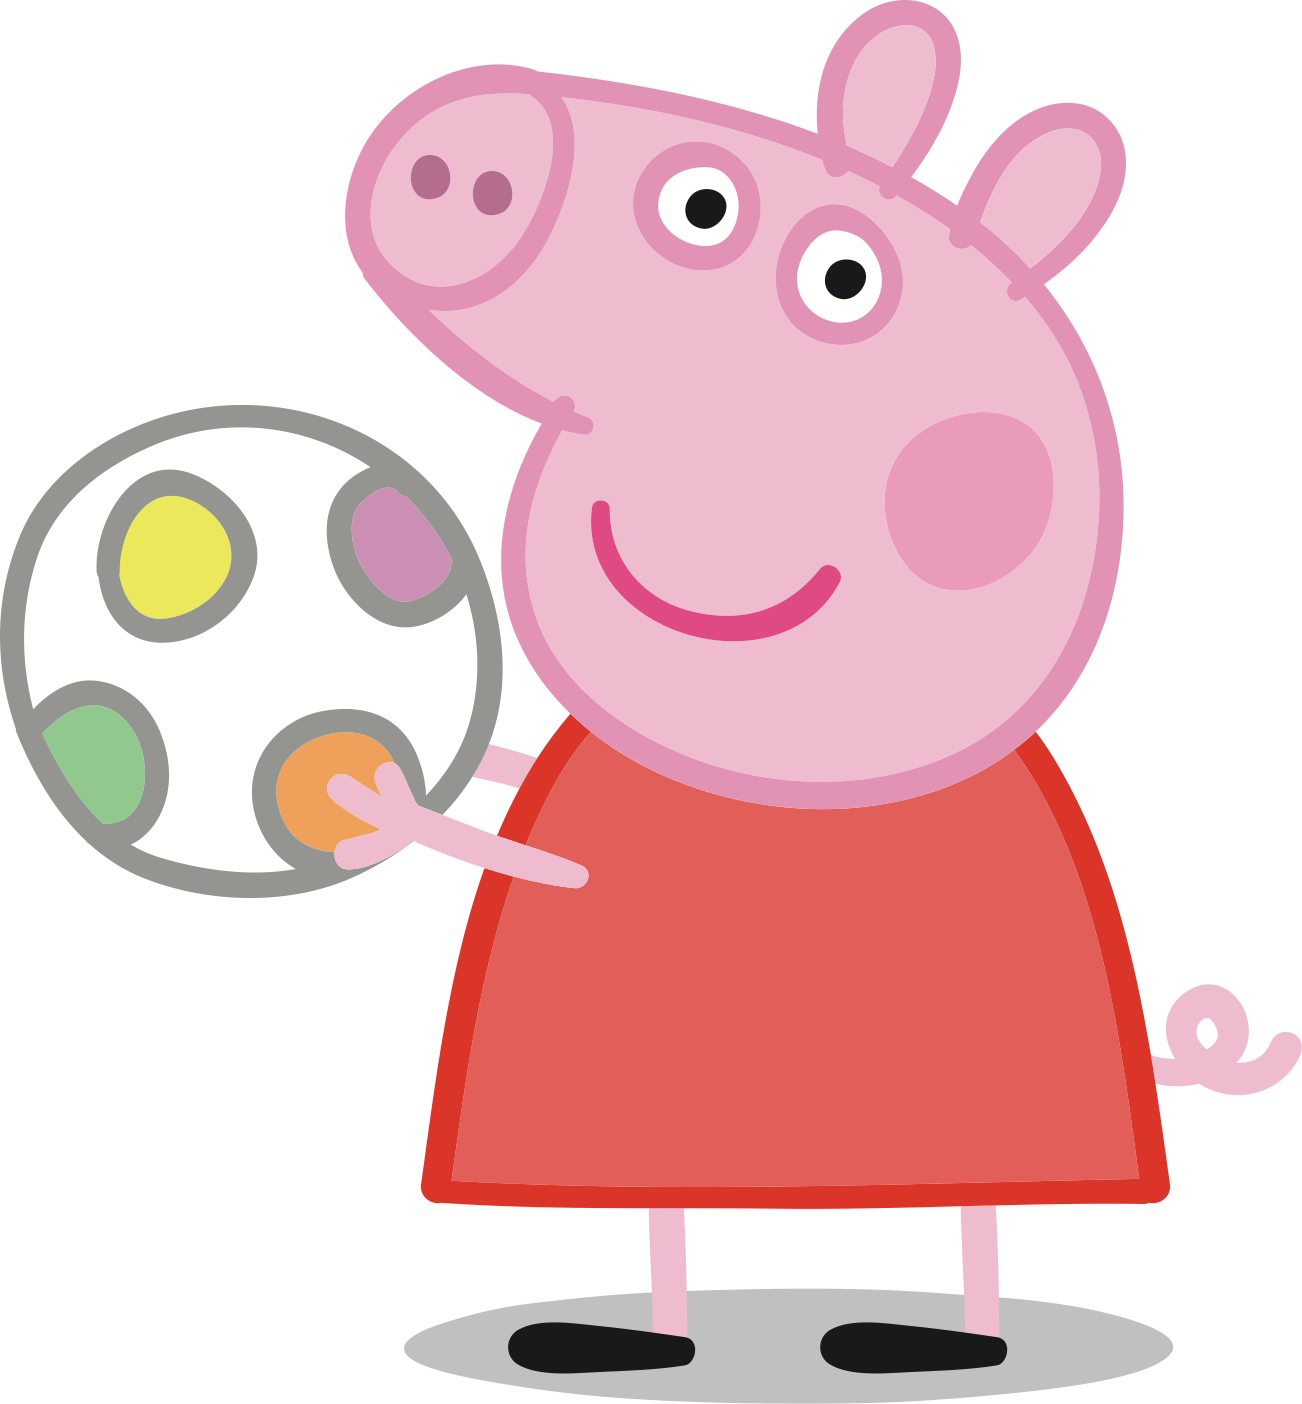 Peppa Pig workout programme to tackle inactivity among toddlers